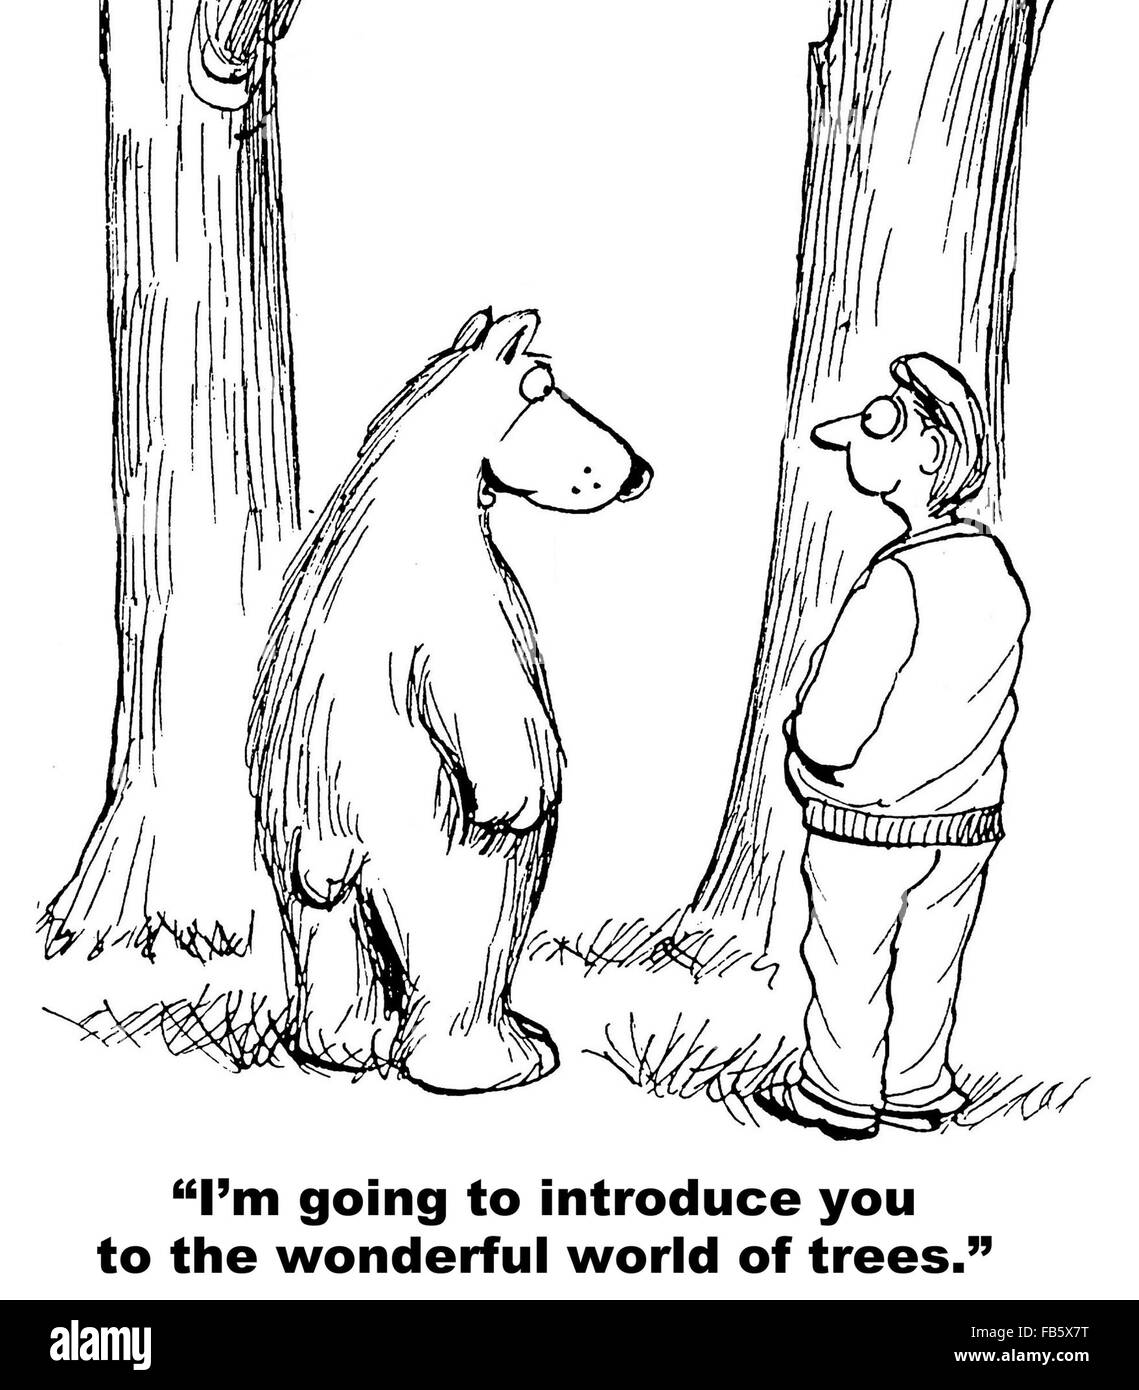 Nature cartoon.  The bear is introducing the human being to the wonderful world of trees. Stock Photo